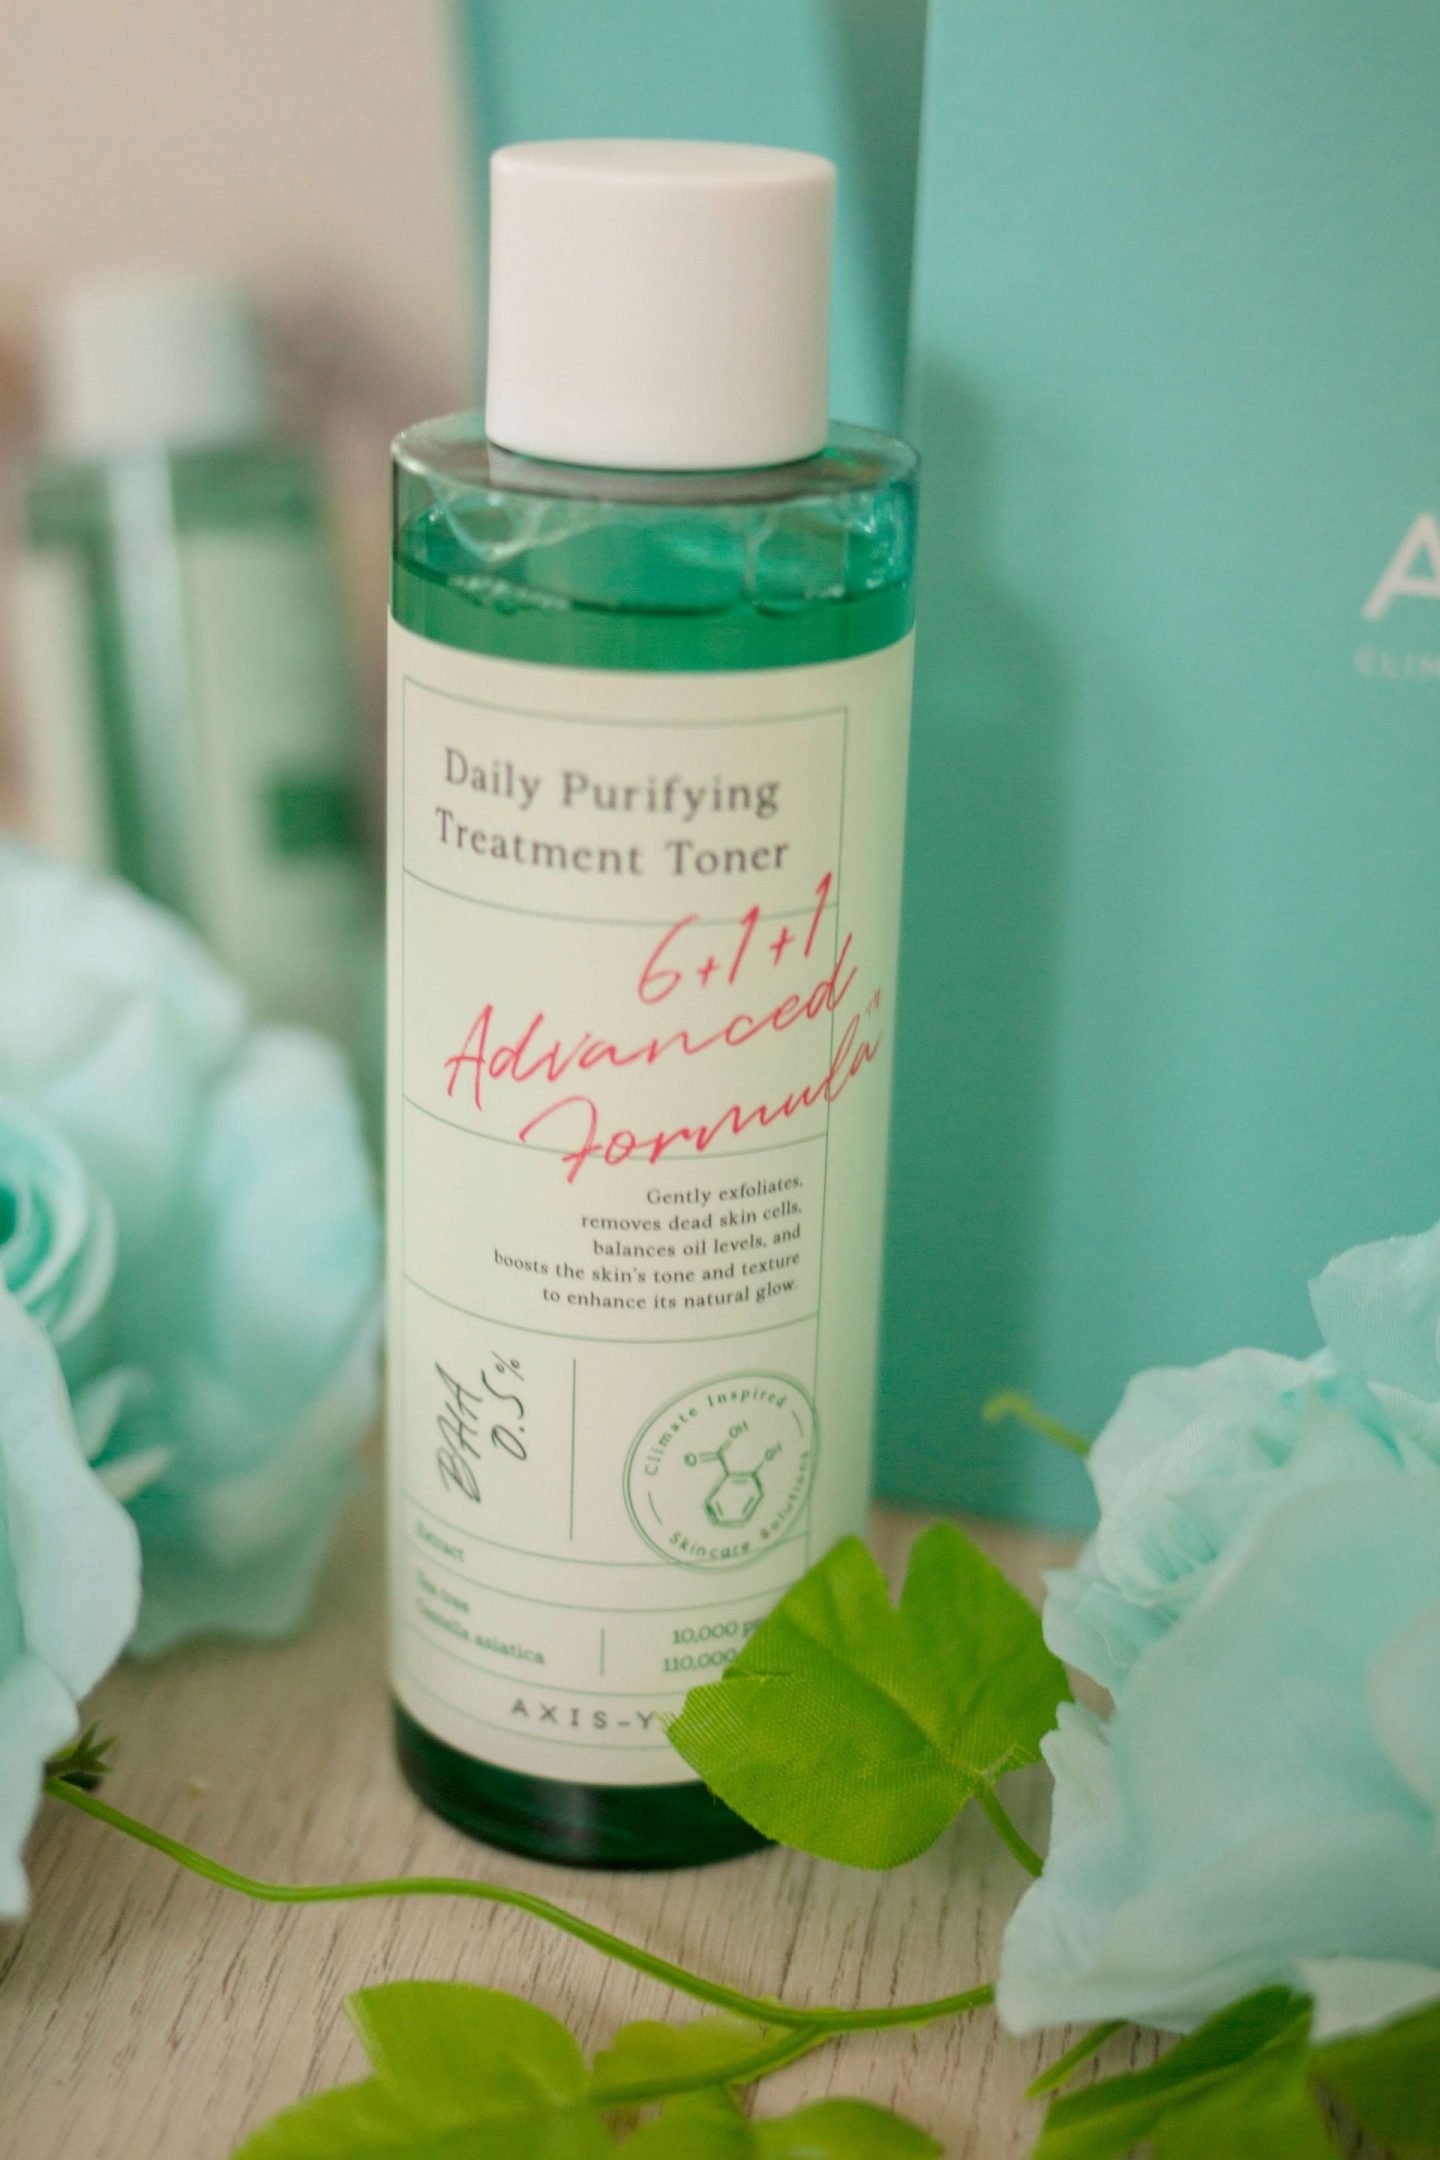 axis-y daily purifying treatment toner 